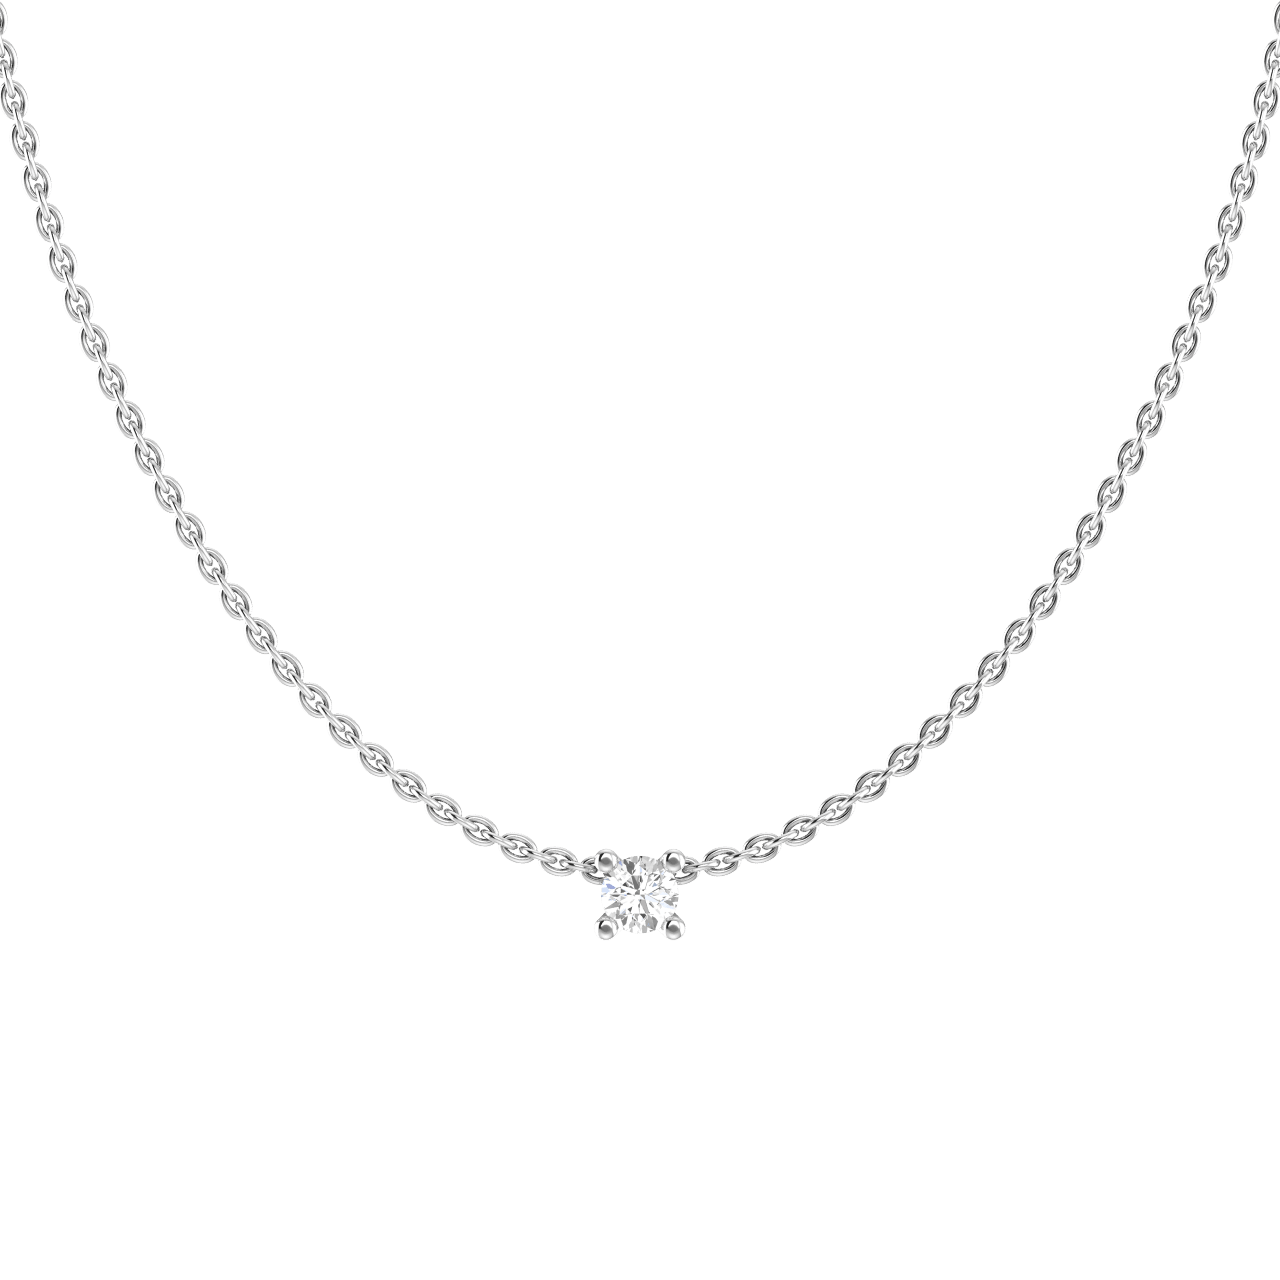 18K Gold Lab-Grown Diamond Solitaire Necklace | 18K white gold / 0.1 ct / Chain length 450 mm  | Jewelry | The Future Rocks